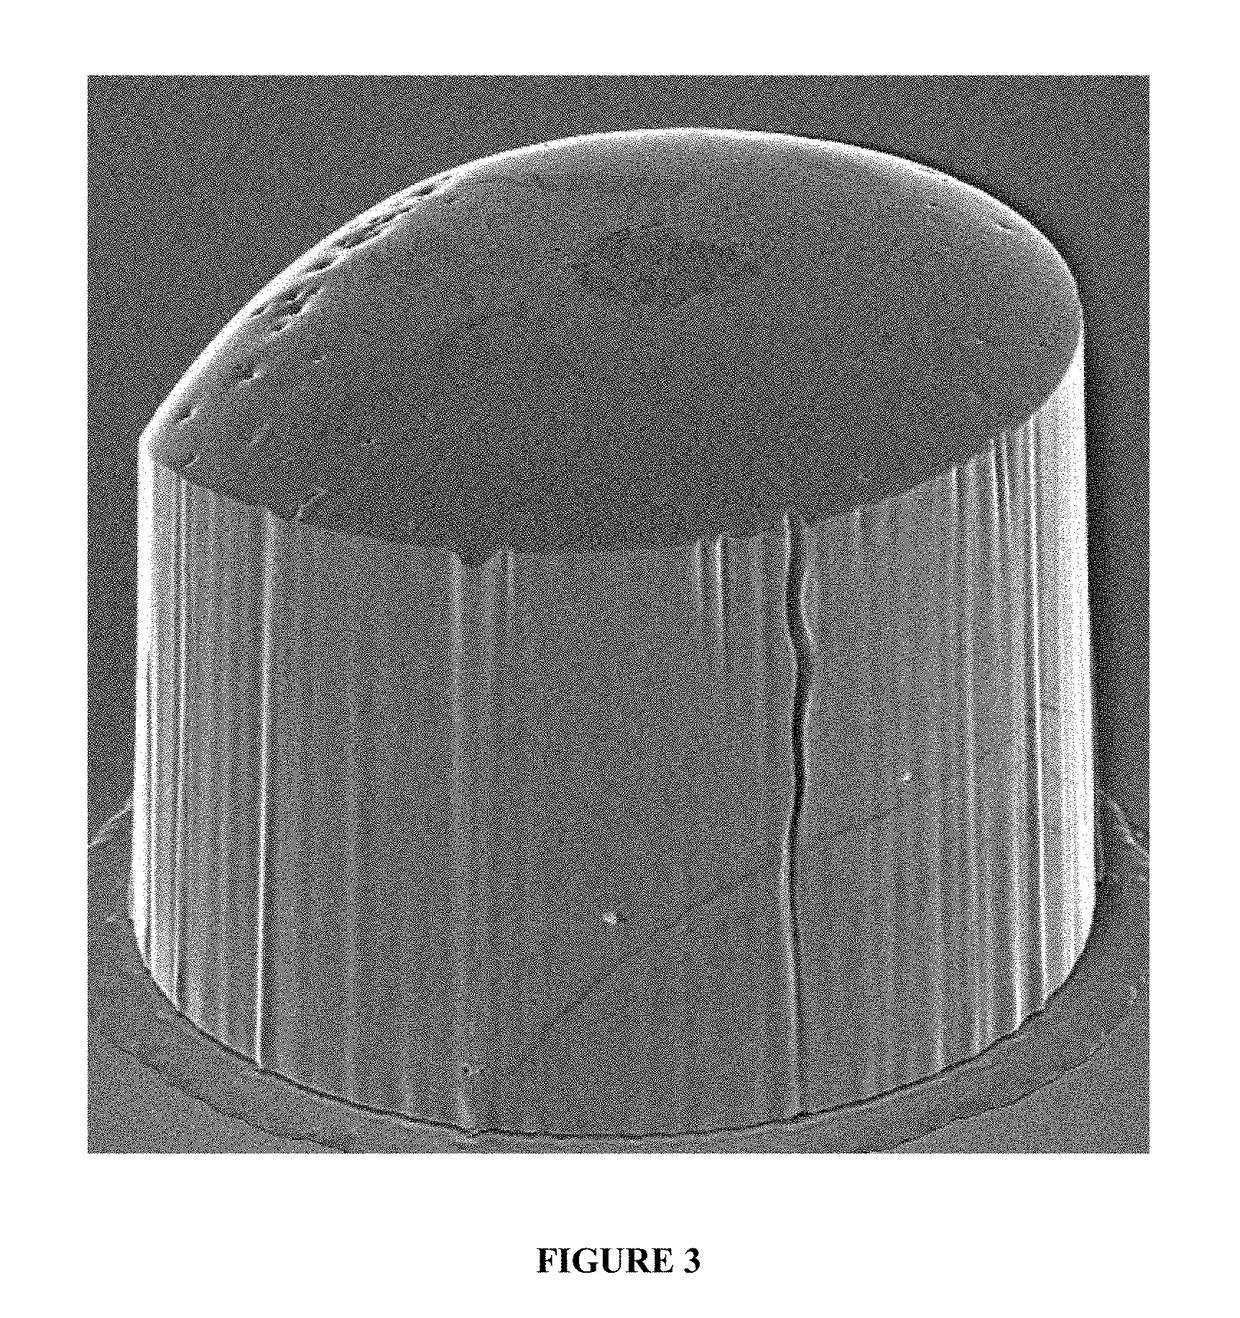 Copper electroplating baths and electroplating methods capable of electroplating megasized photoresist defined features